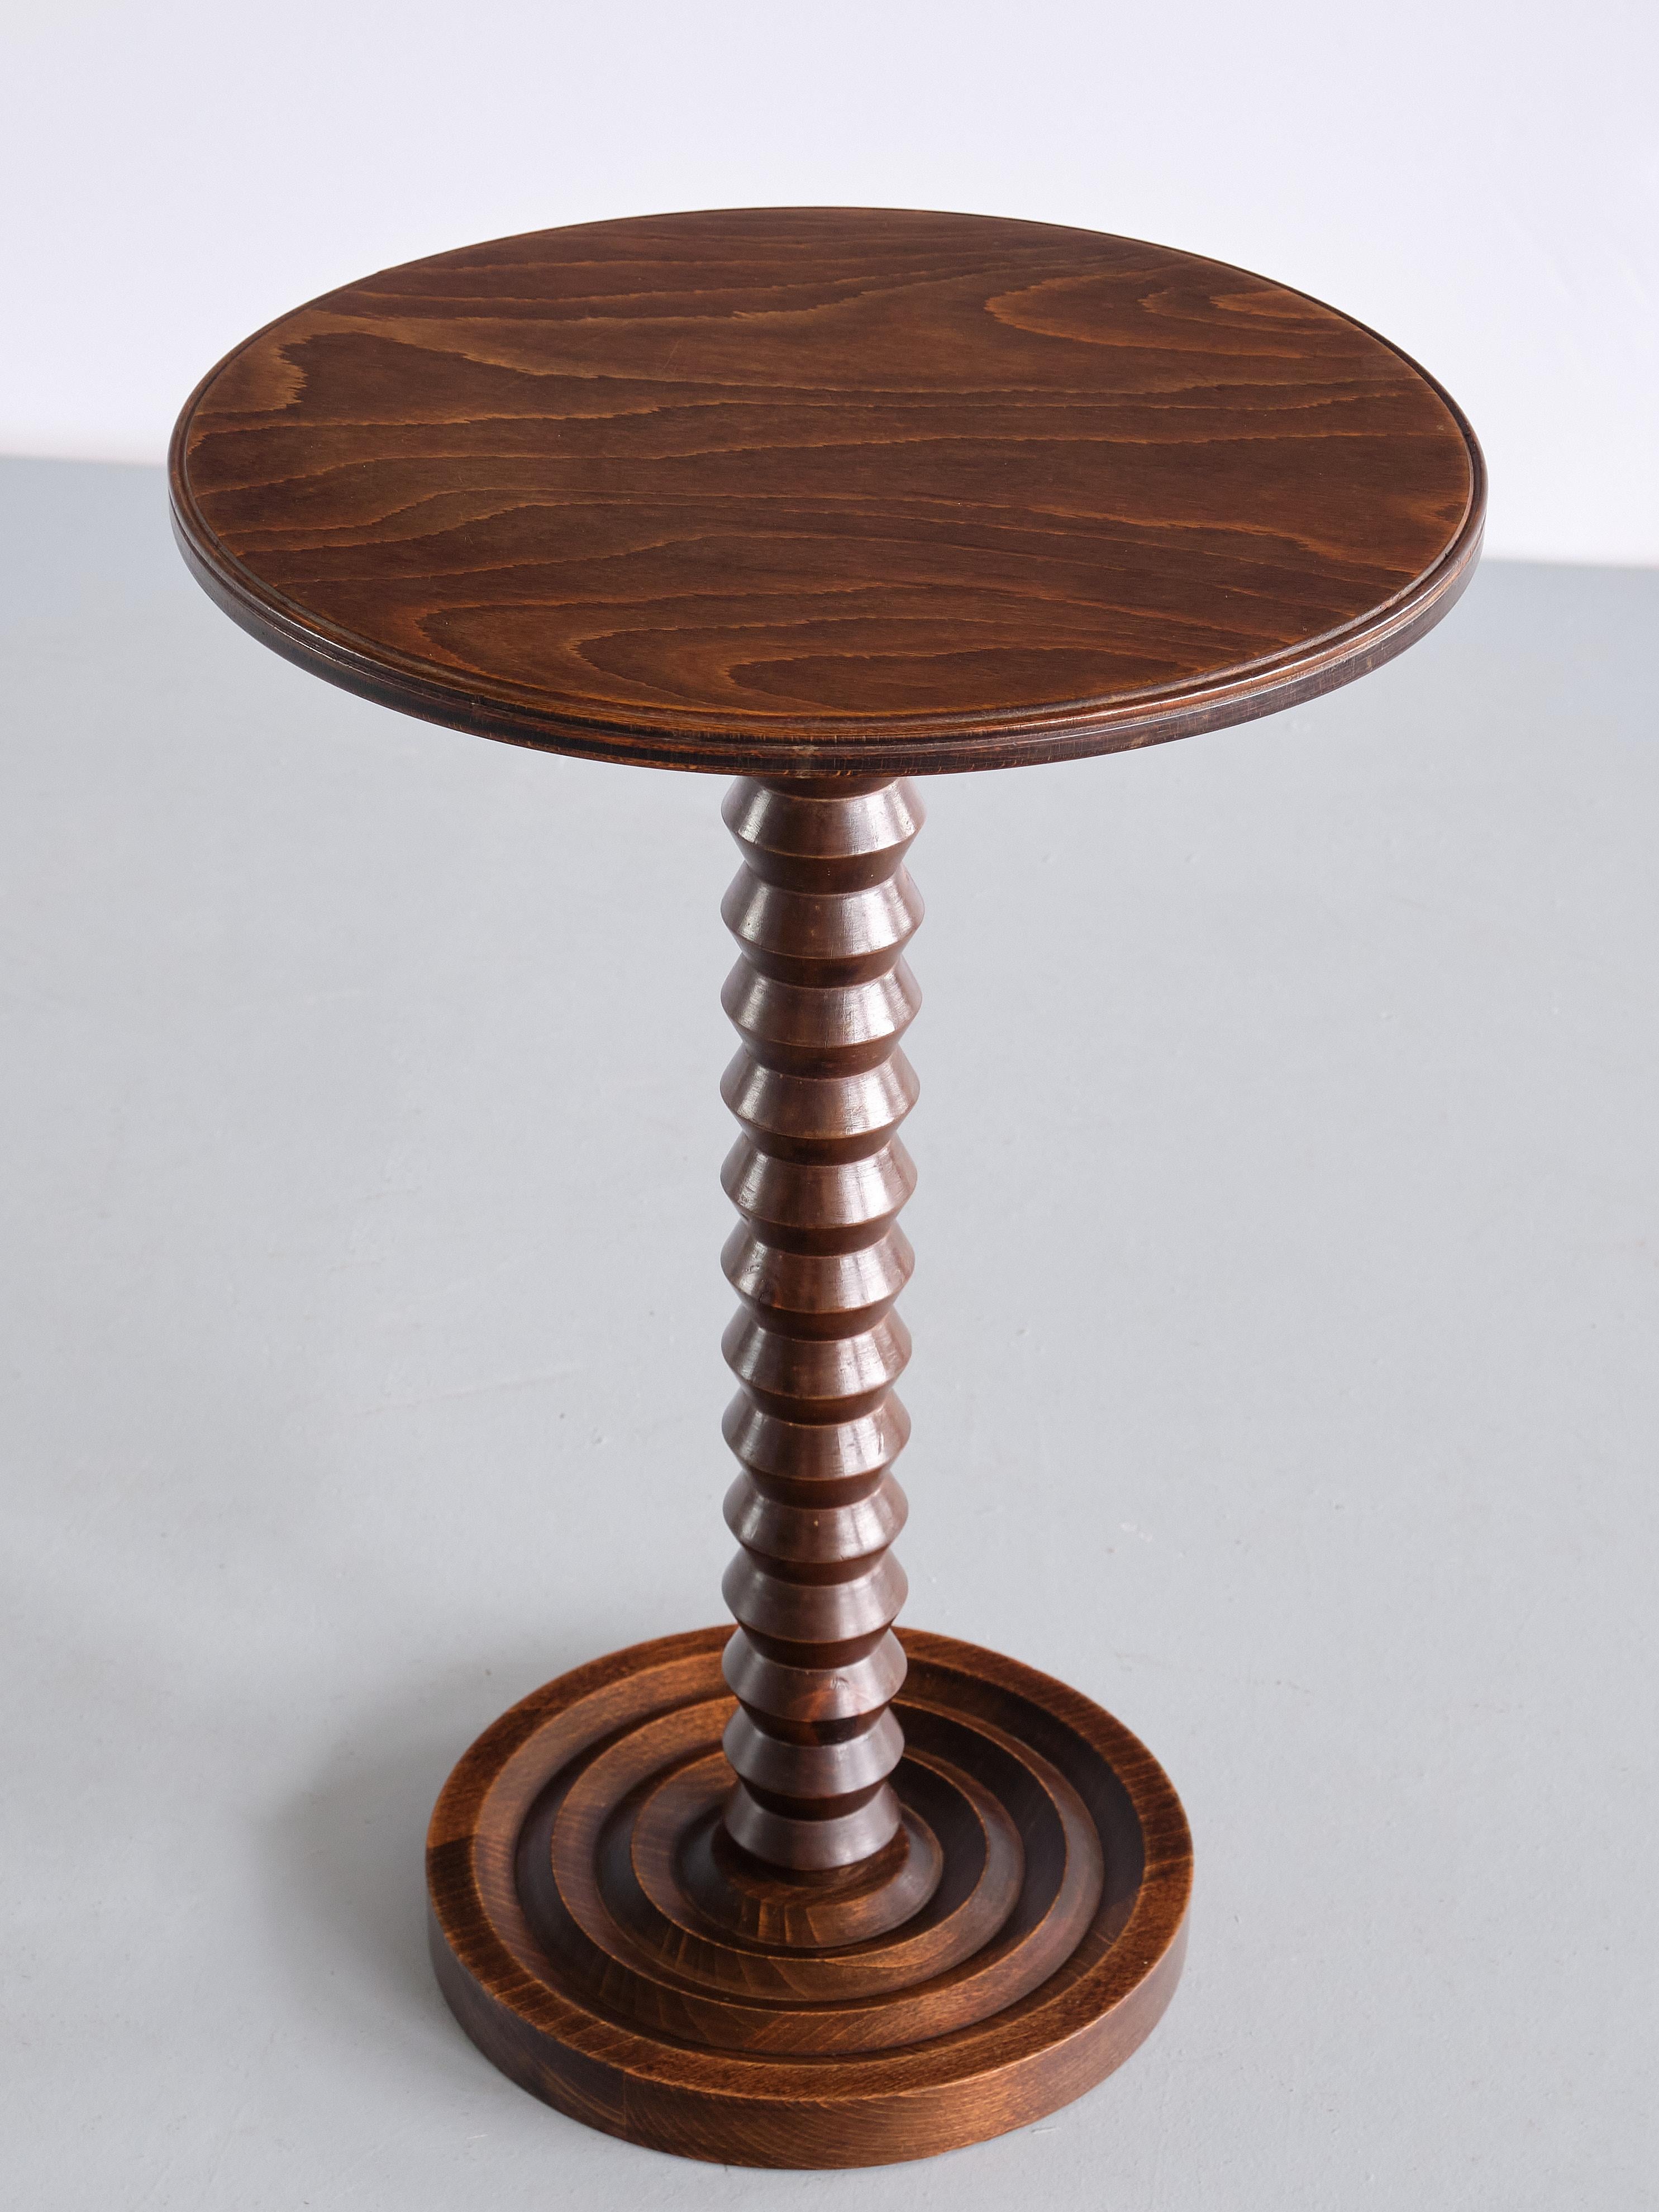 This rare side table was designed by Charles Dudouyt and produced in France in the late 1940s. The round top in solid dark stained oak with a rounded edge. The top with a visually attractive, distinct wood grain.The striking centred column is in